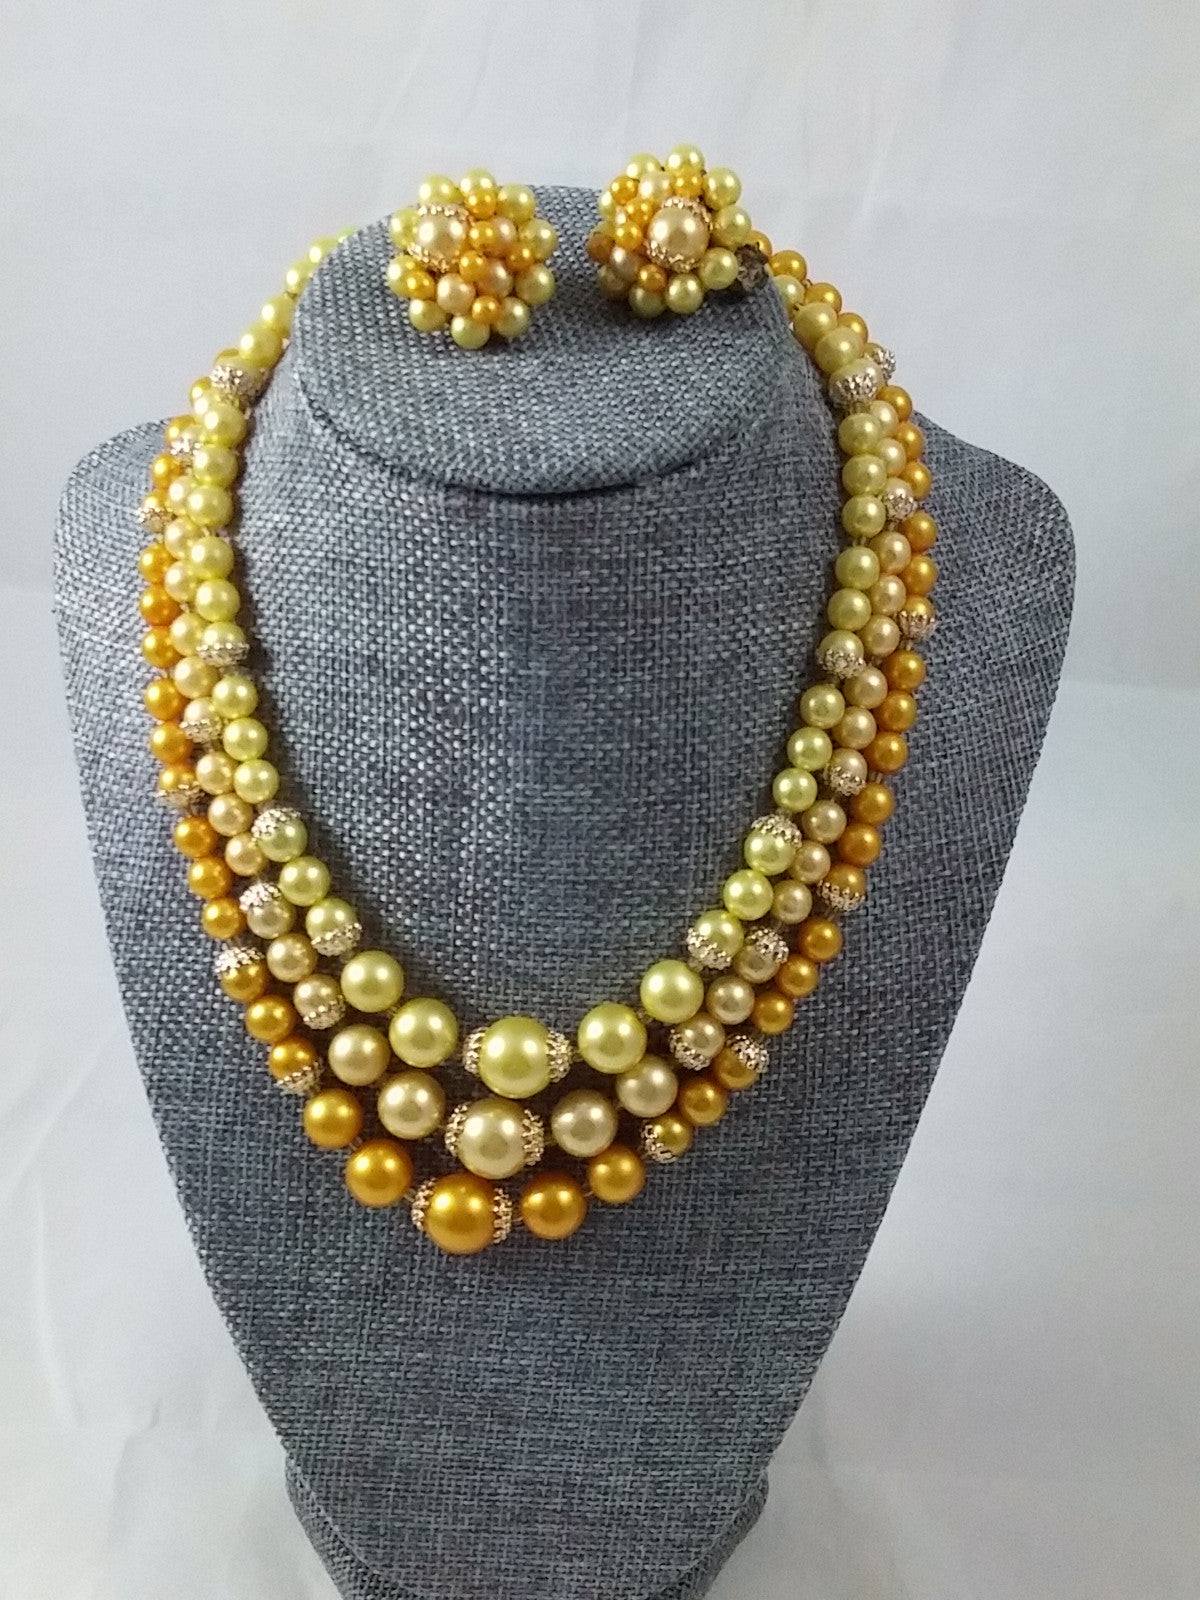 Vintage 50s 60s Multi Strand Necklace and Cluster Earrings Warm Yellow and Gold Tones - Dirty 30 Vintage | Vintage Clothing, Vintage Jewelry, Vintage Accessories